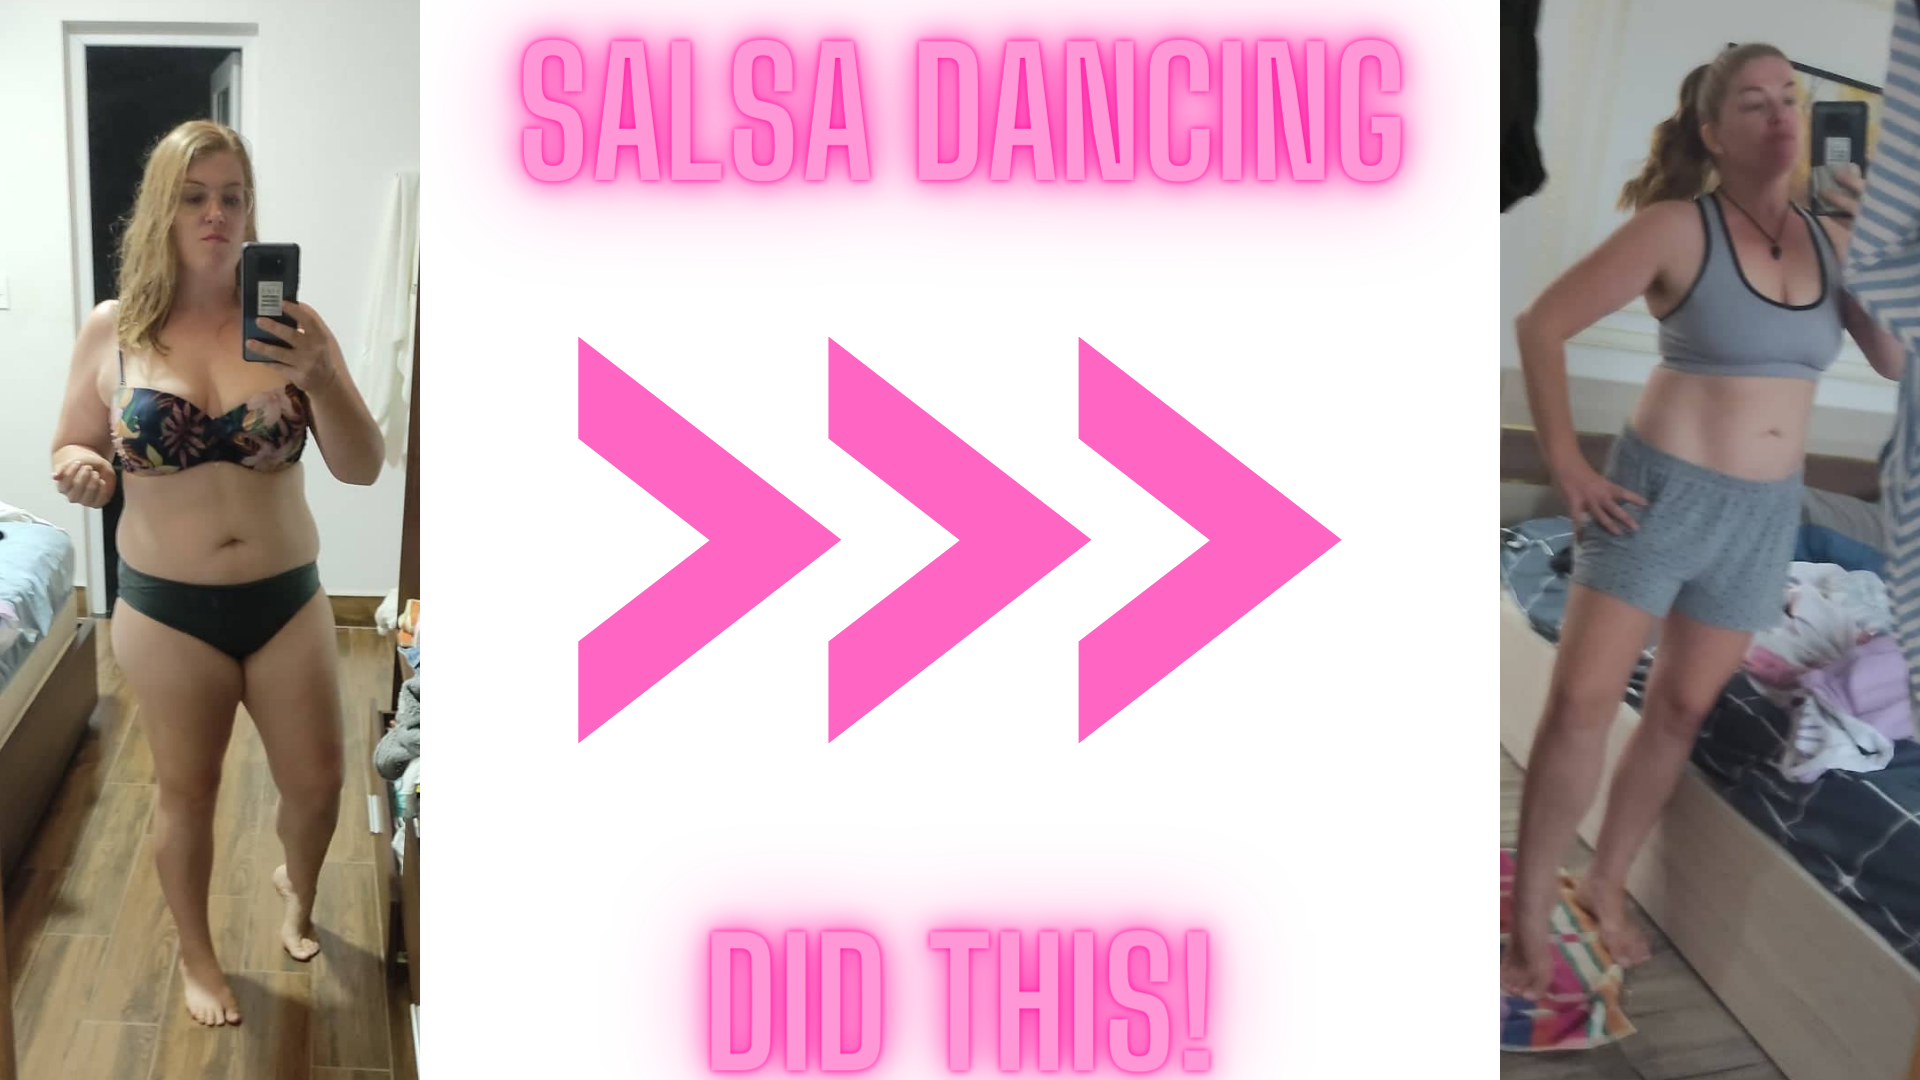 Get Fit With Salsa Dancing!